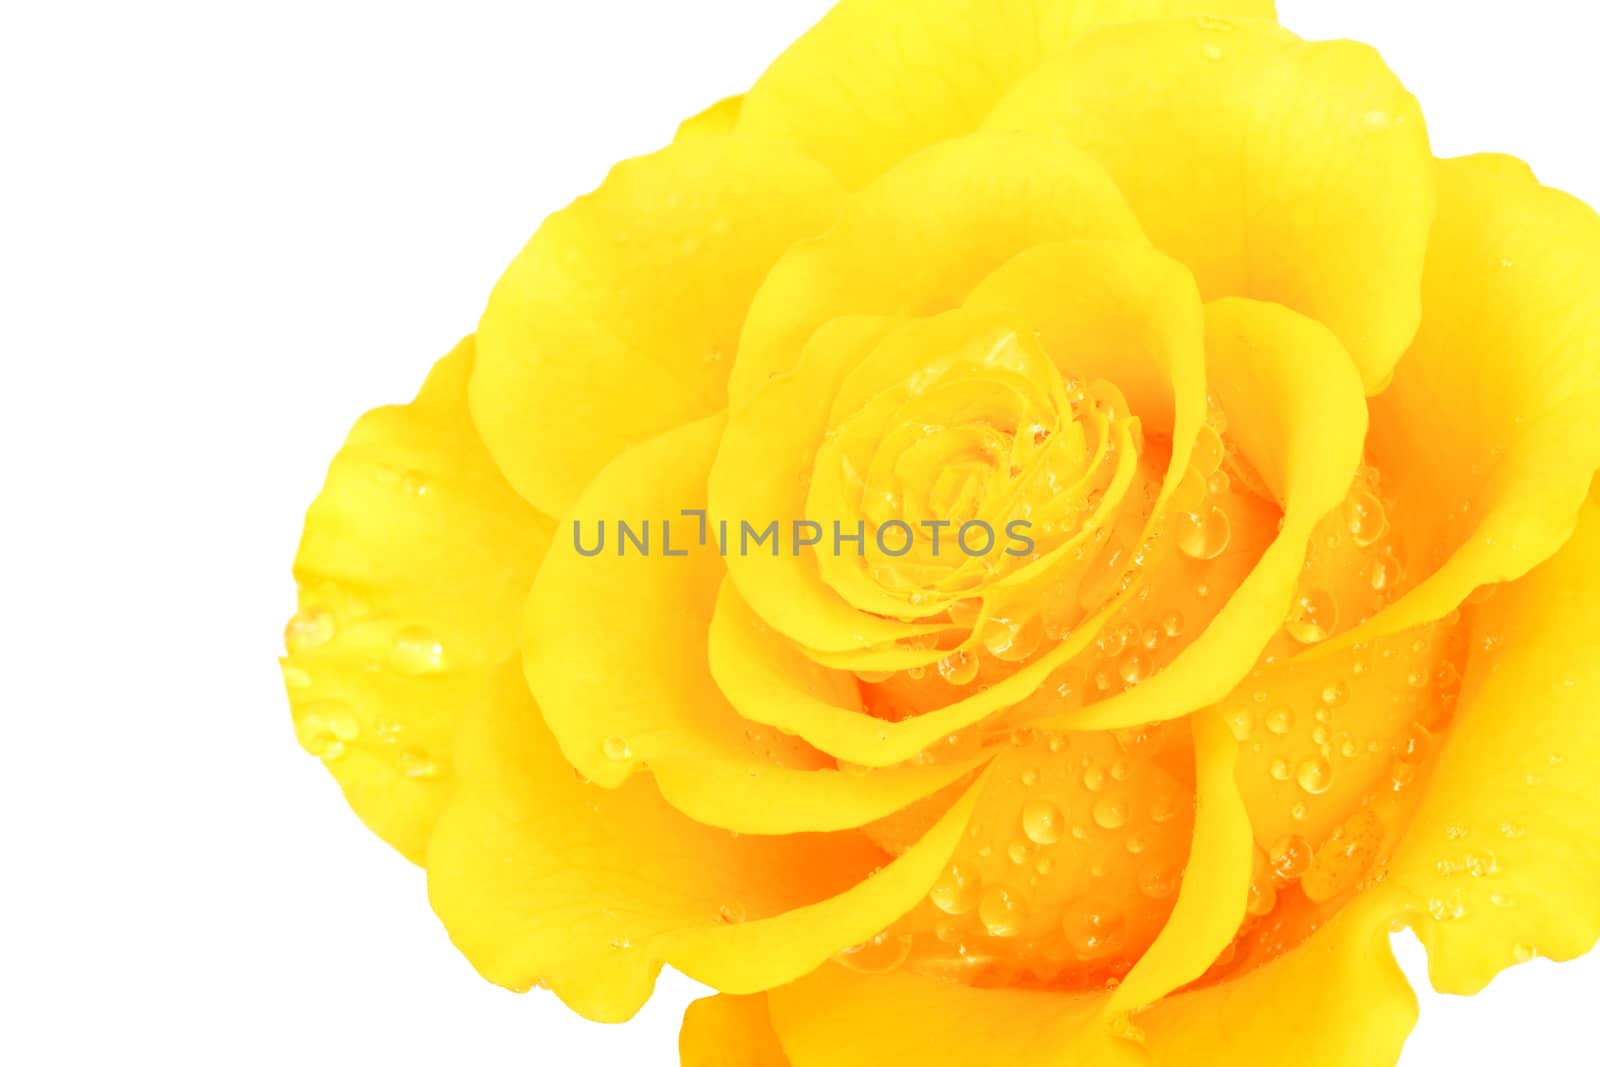 Beautiful yellow flower on a white background